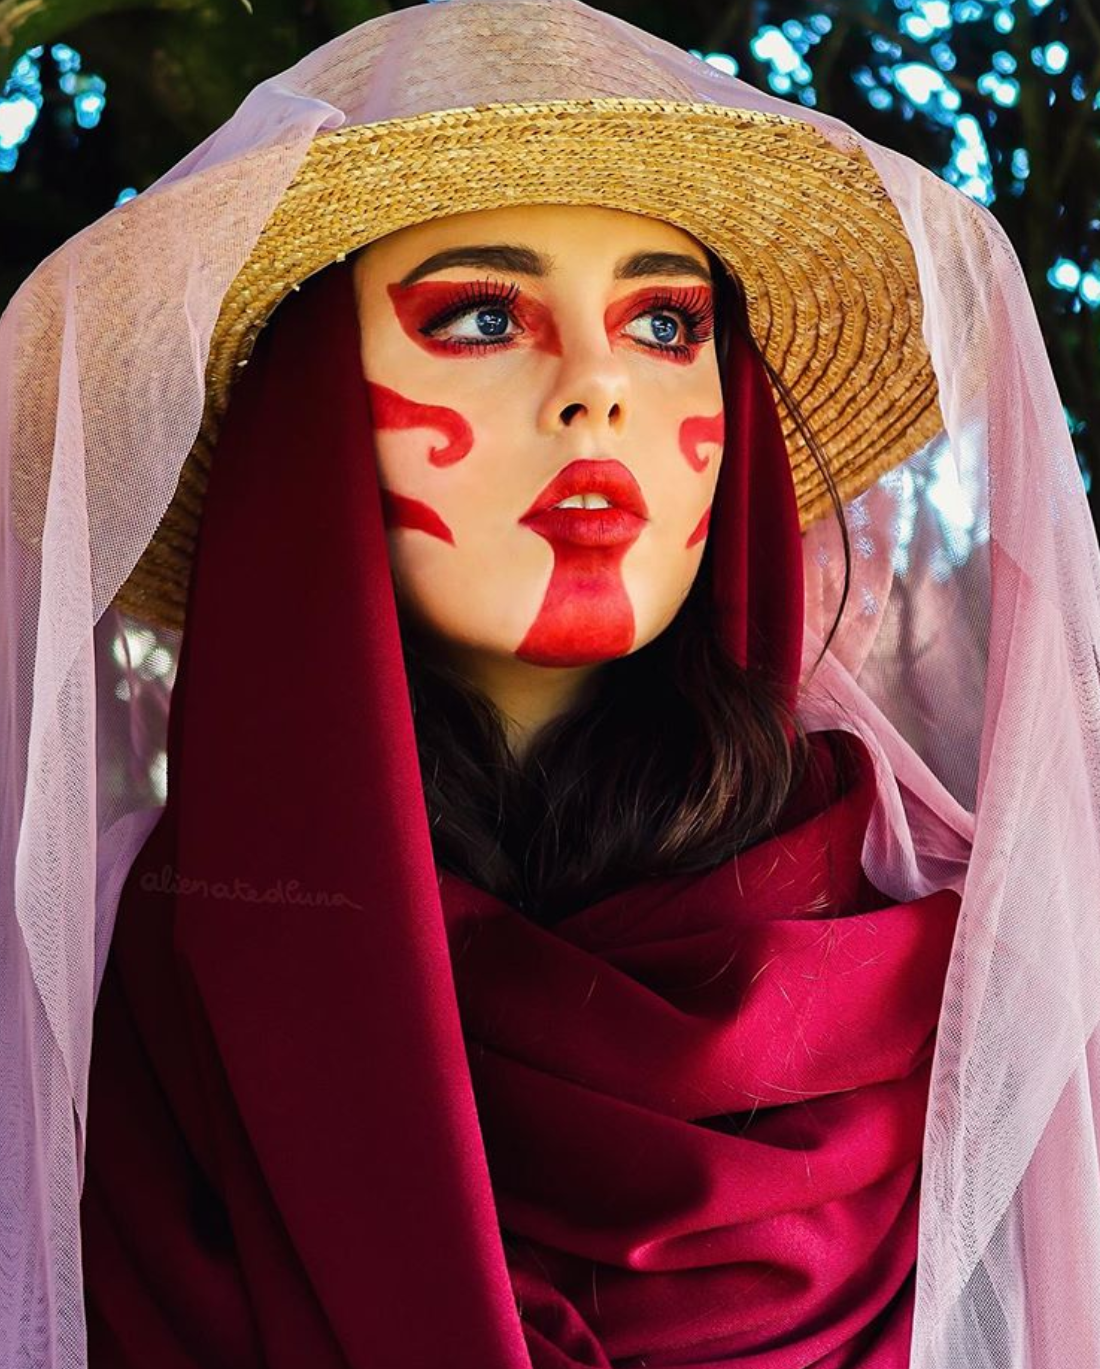 A girl in red face paint and a hat looks upwards.